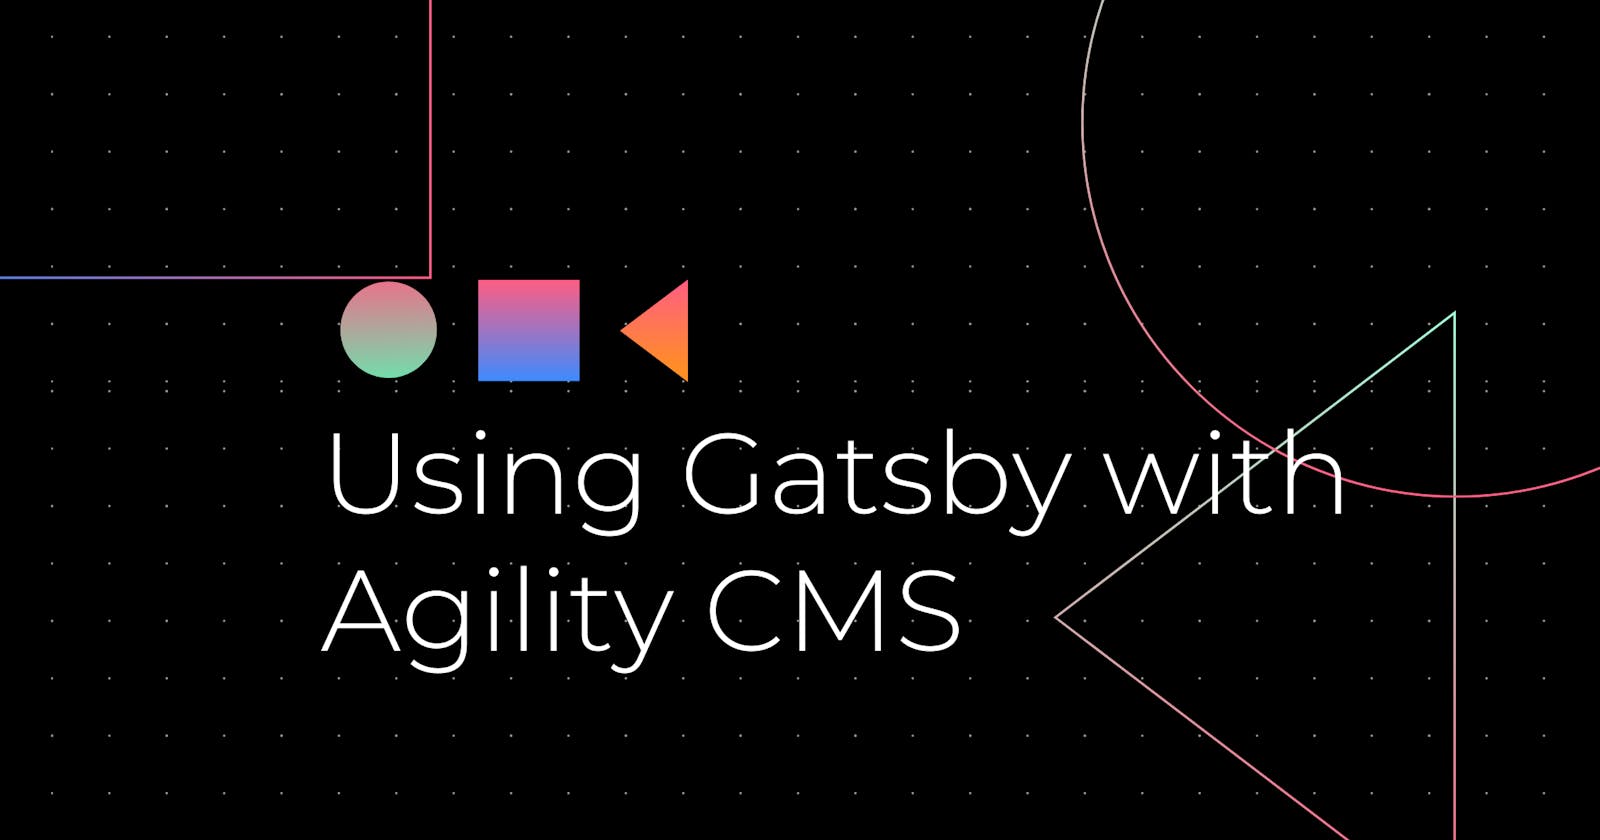 Using Gatsby with Agility CMS